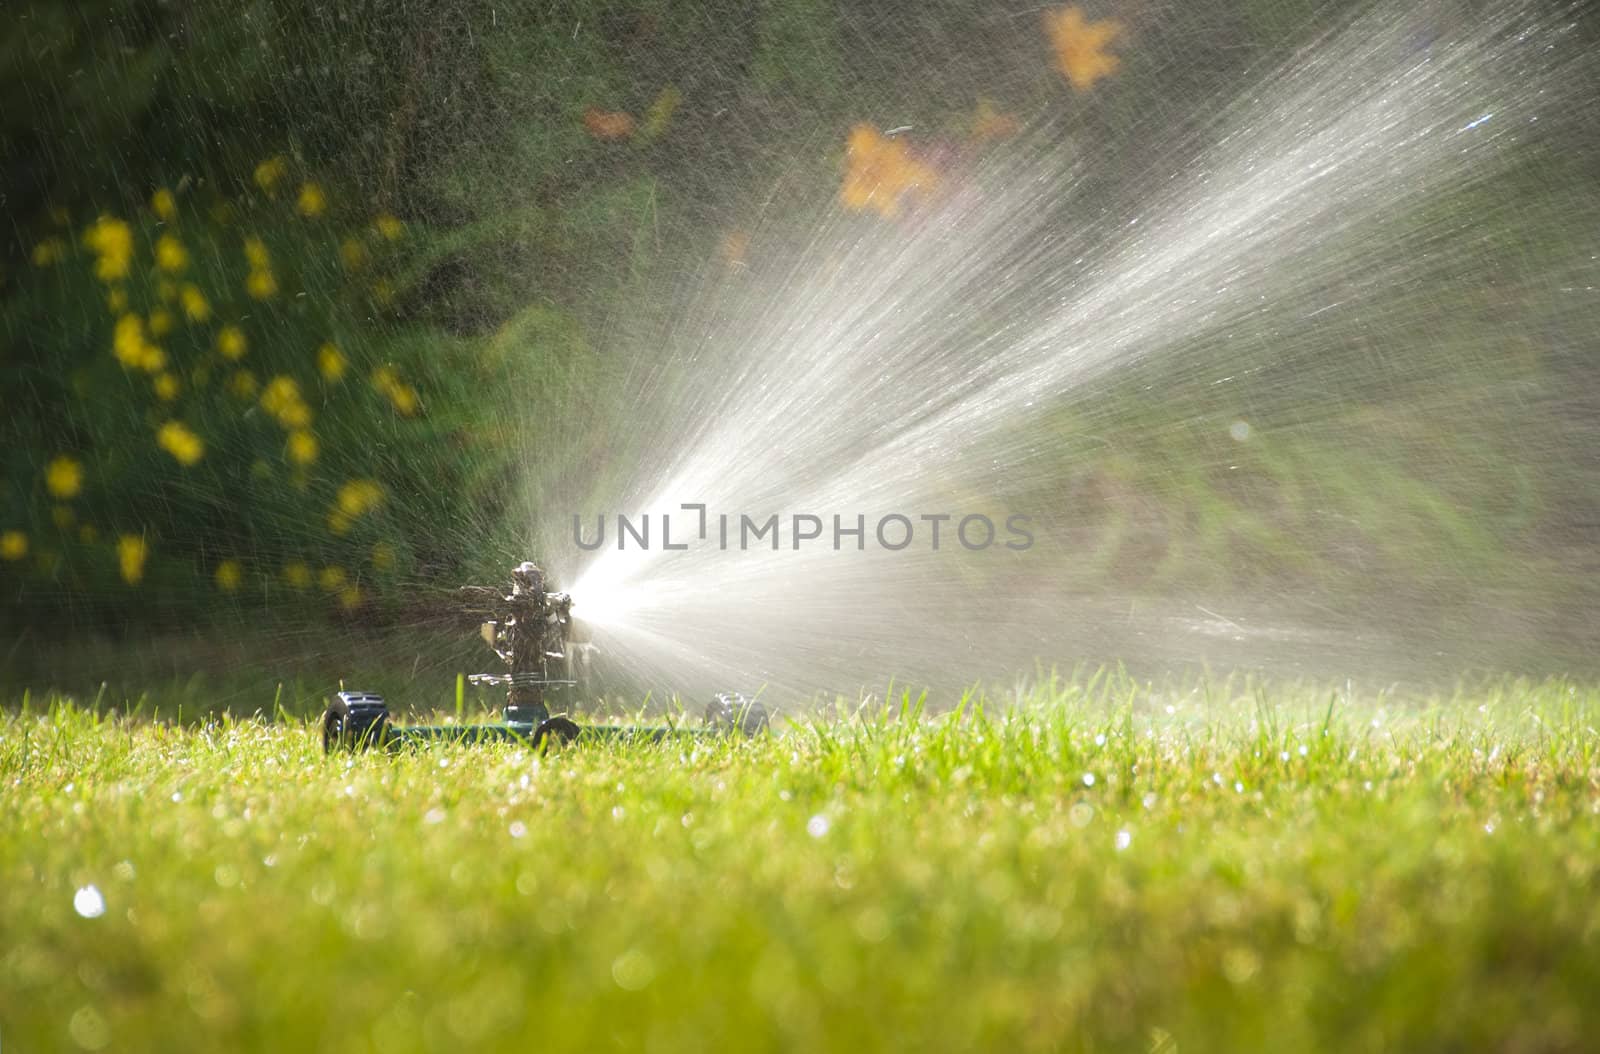 Lawn sprinkler by f/2sumicron